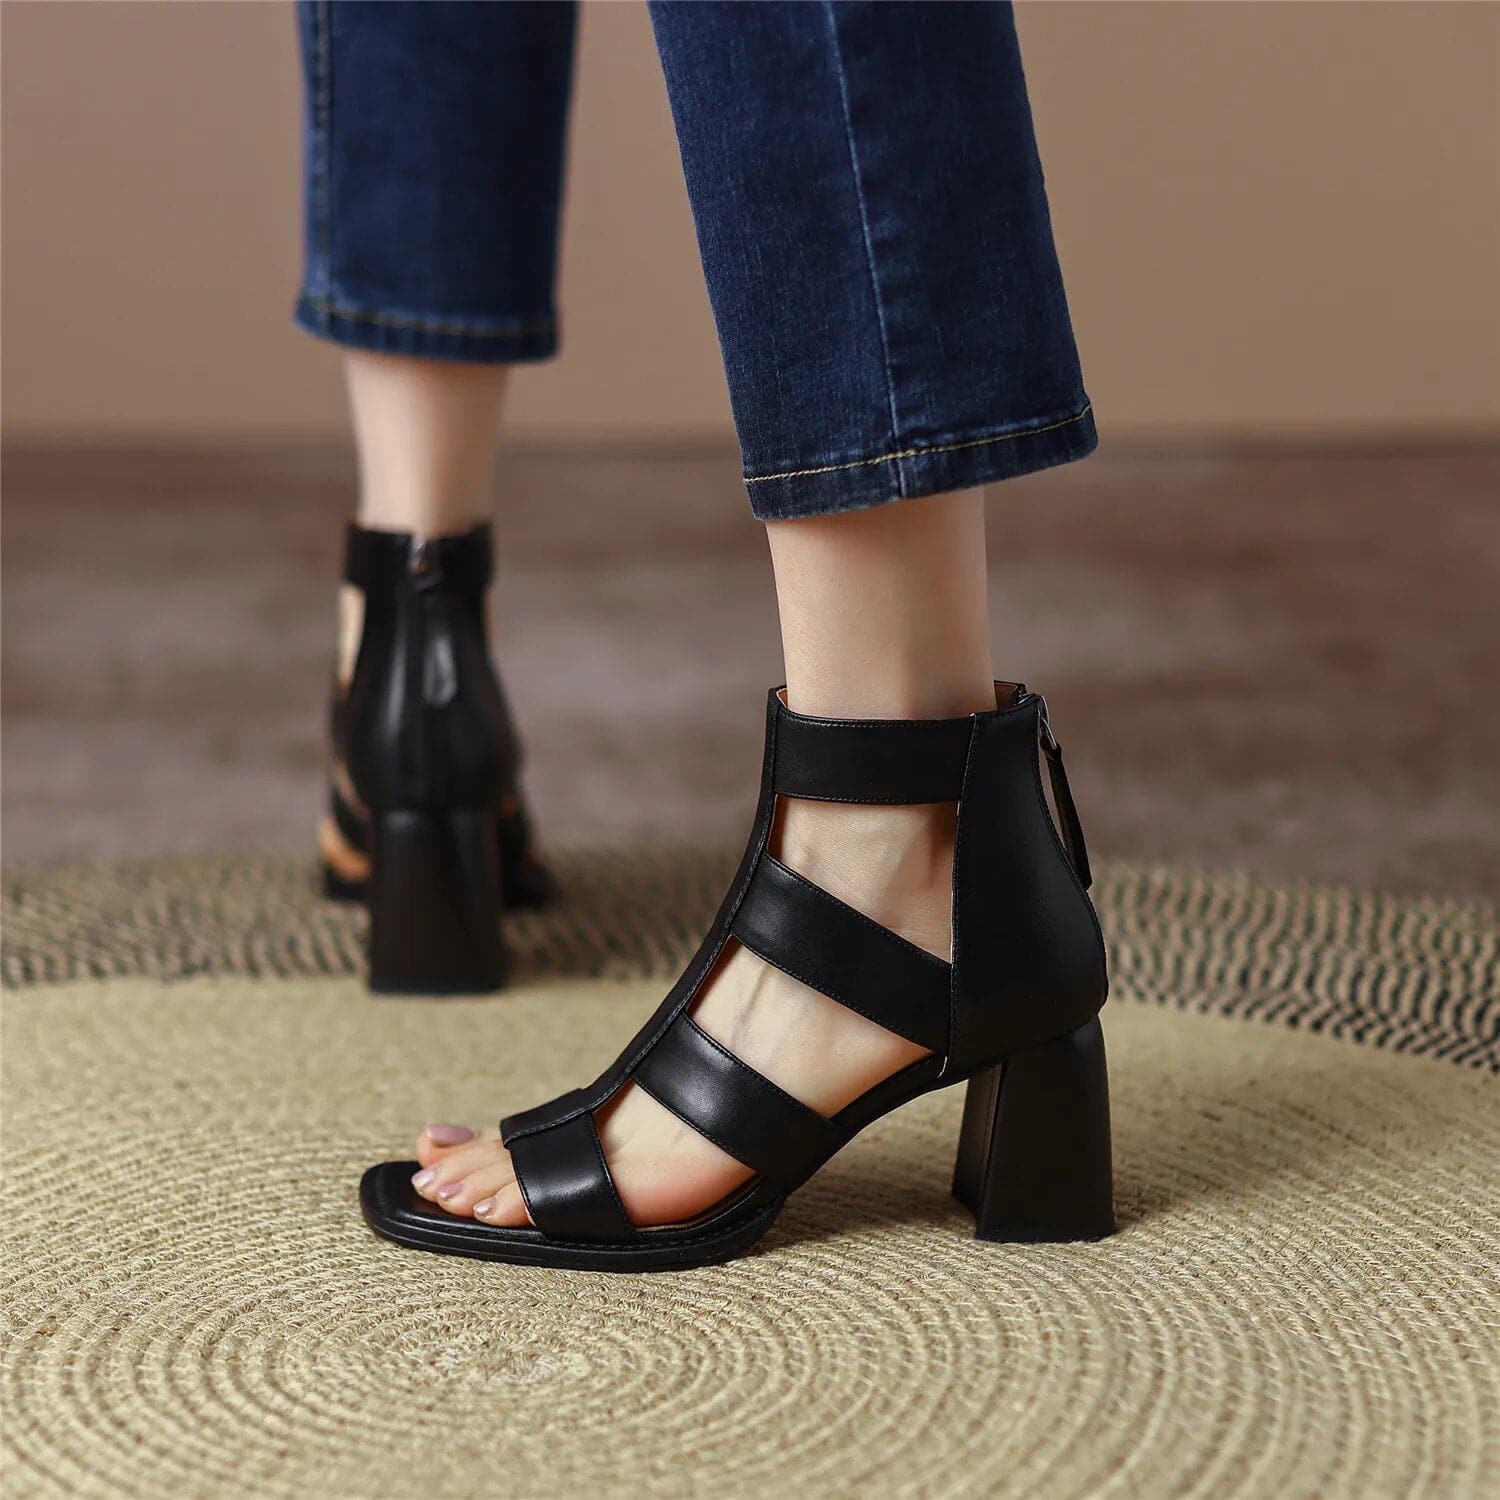 Leather Gladiator Sandals - Wandering Woman